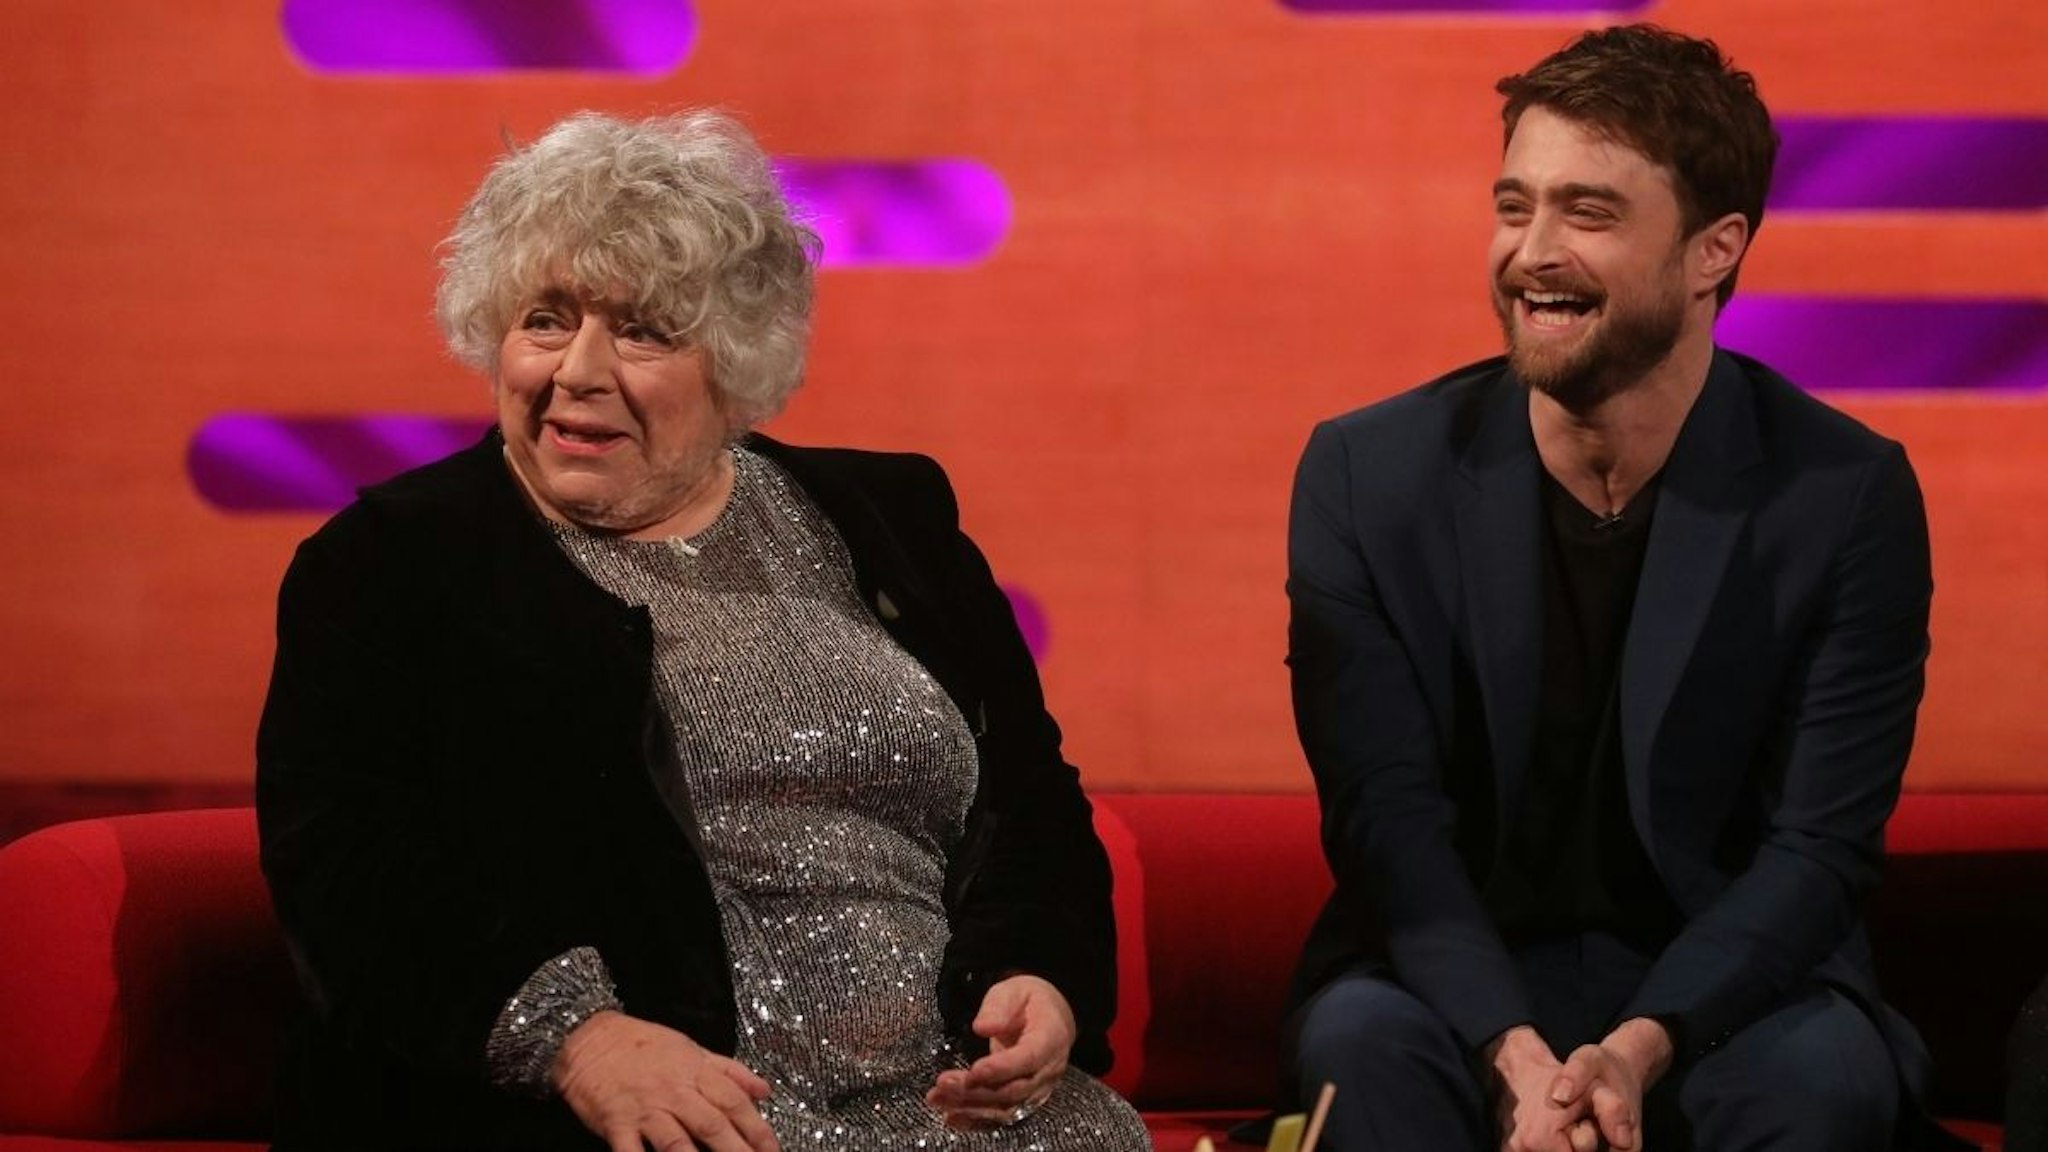 Miriam Margolyes and Daniel Radcliffe during the filming for the Graham Norton Show at BBC Studioworks 6 Television Centre, Wood Lane, London, to be aired on BBC One on Friday evening.